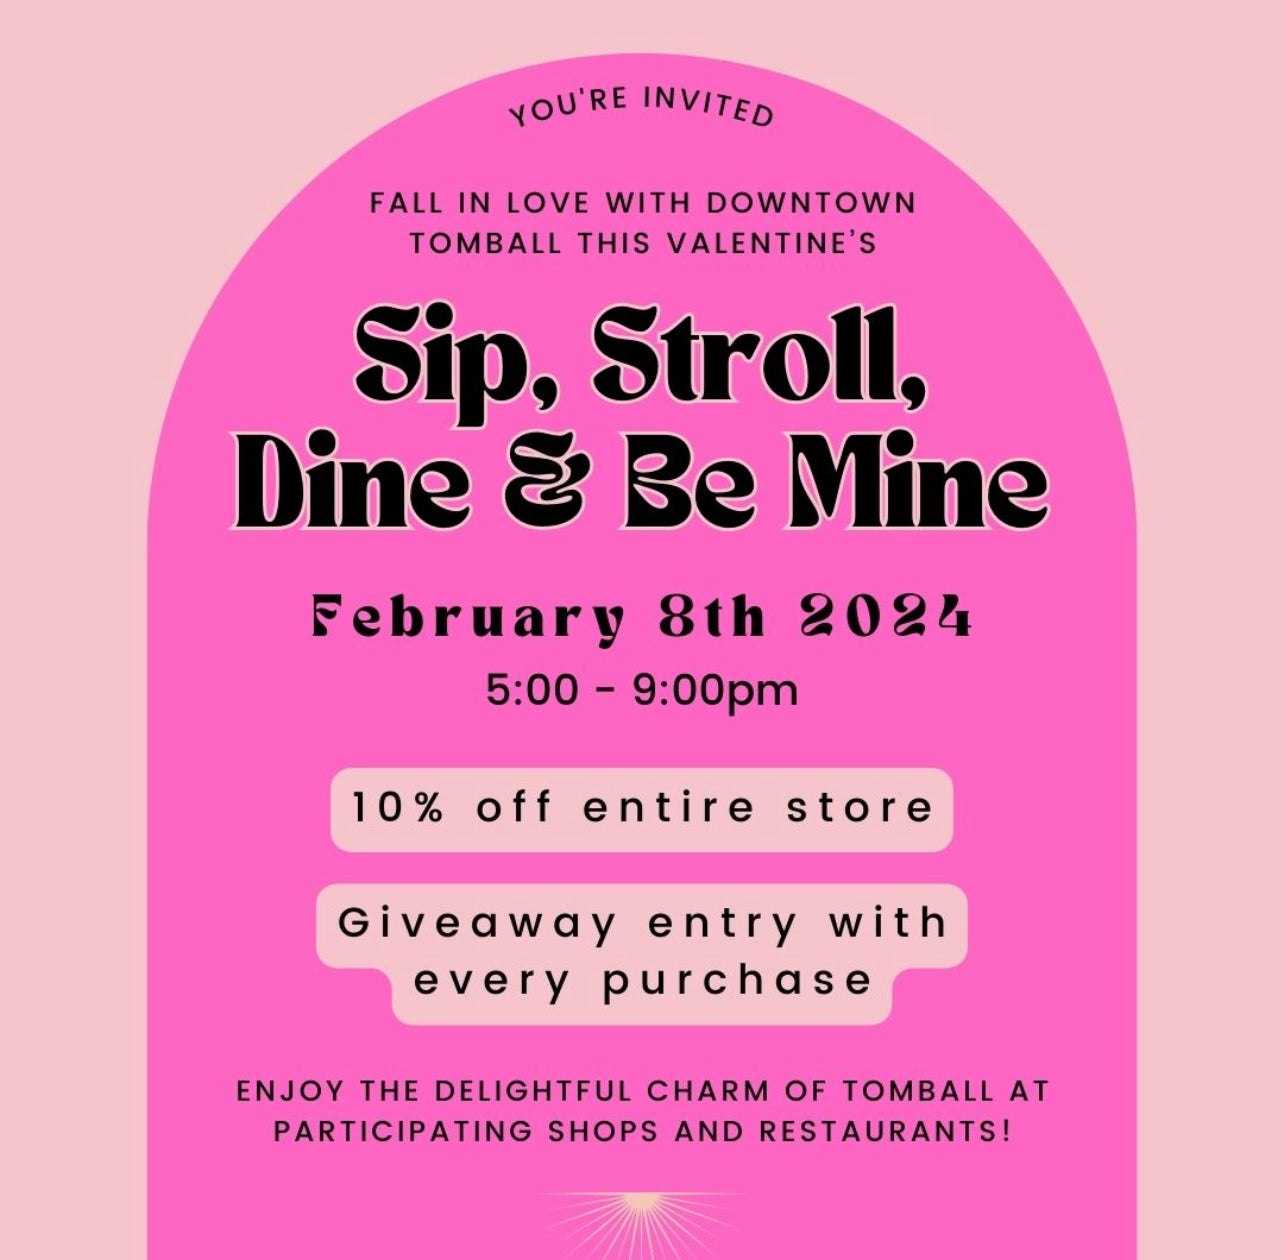 Sip & Stroll in Downtown Tomball